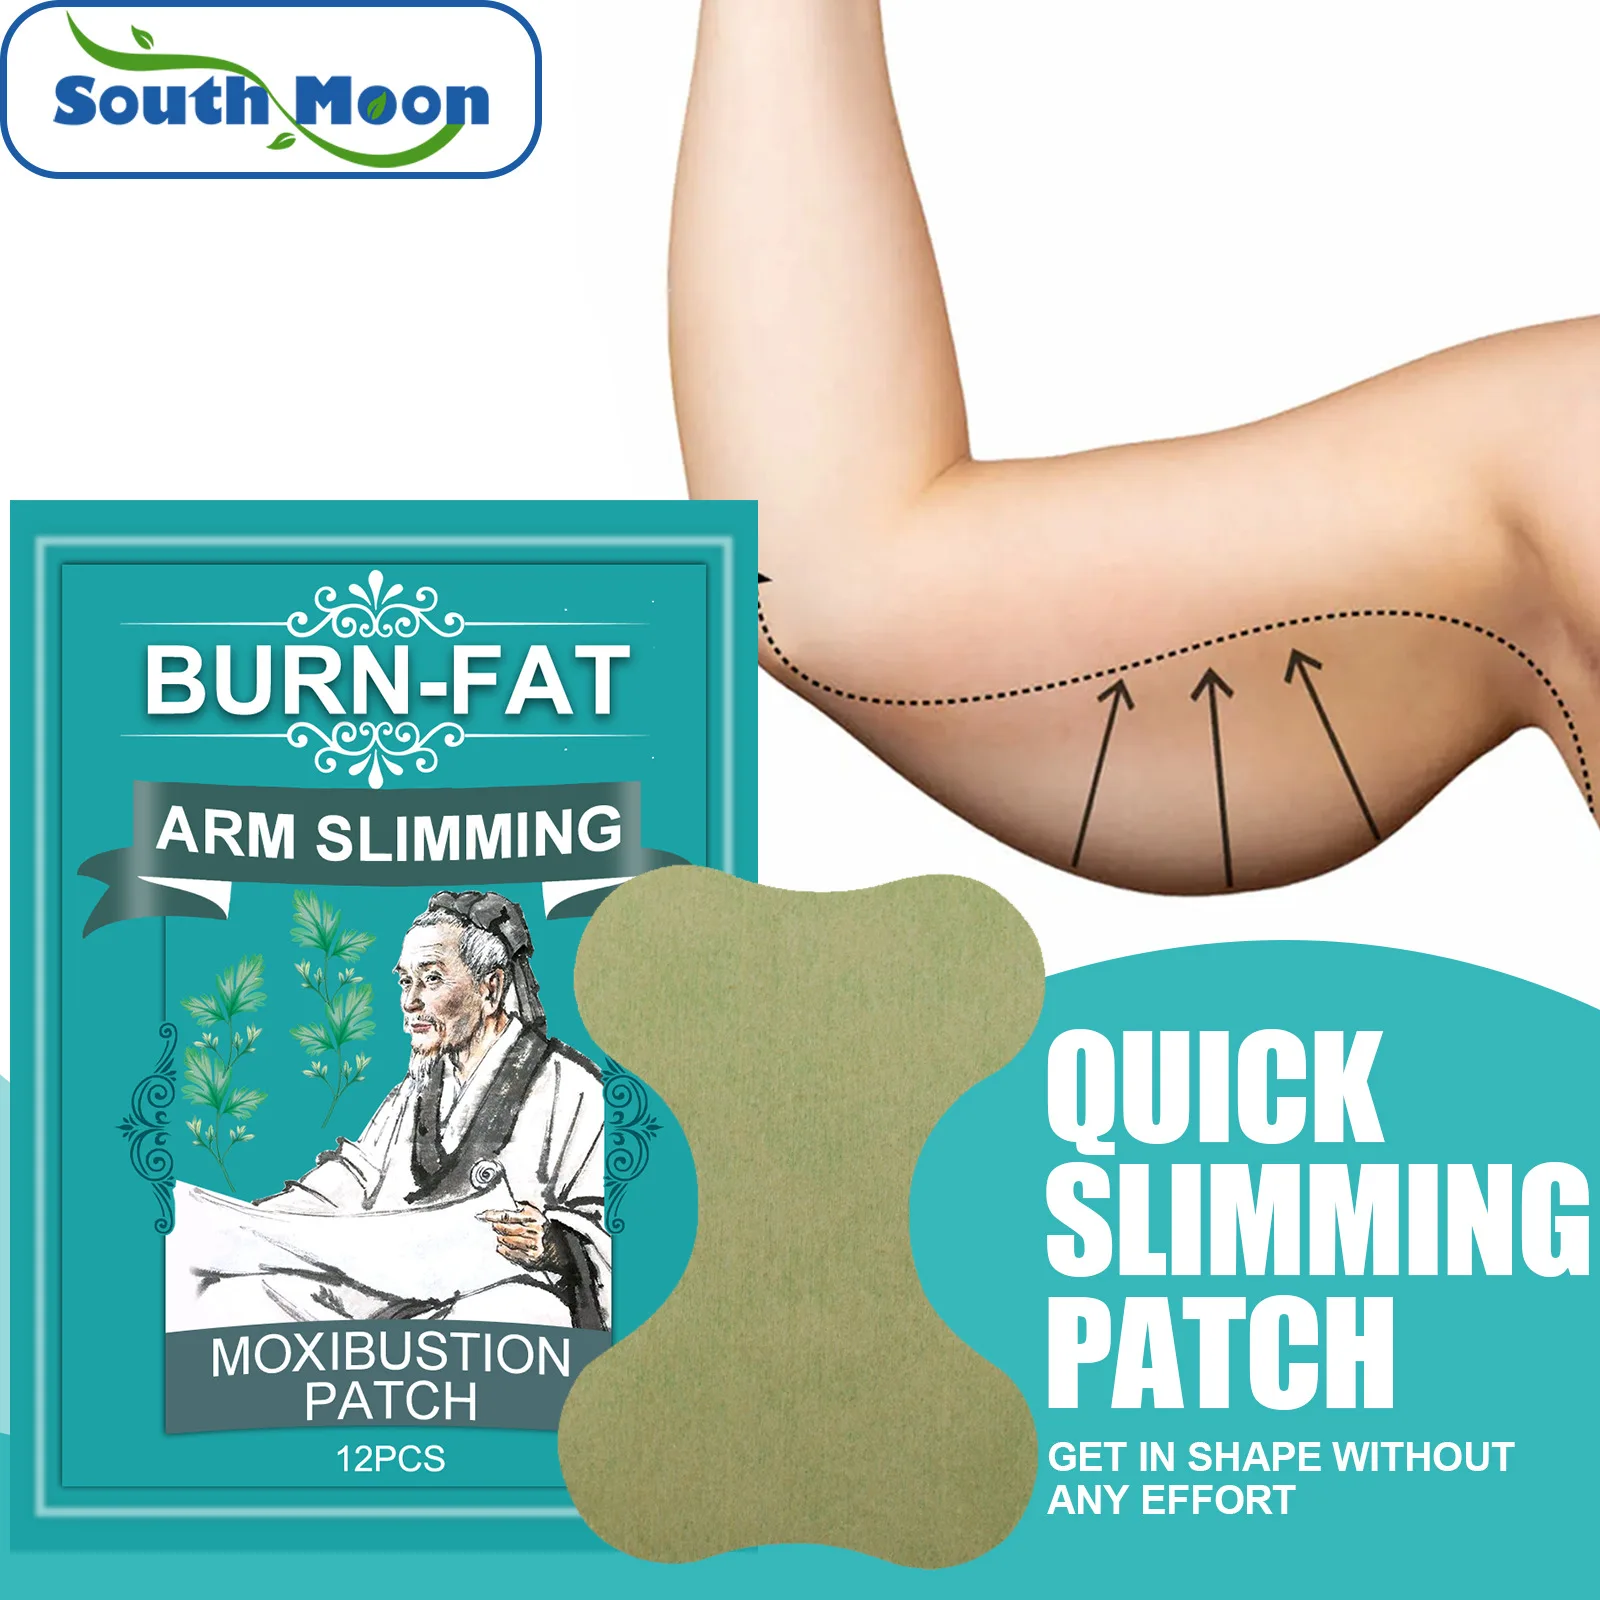 

South Moon Thin Arm Moxibustion Paste Slimming Down Hot Compress Stickers Slimming Products to Burn Fat Lose Weight Patch 12pcs